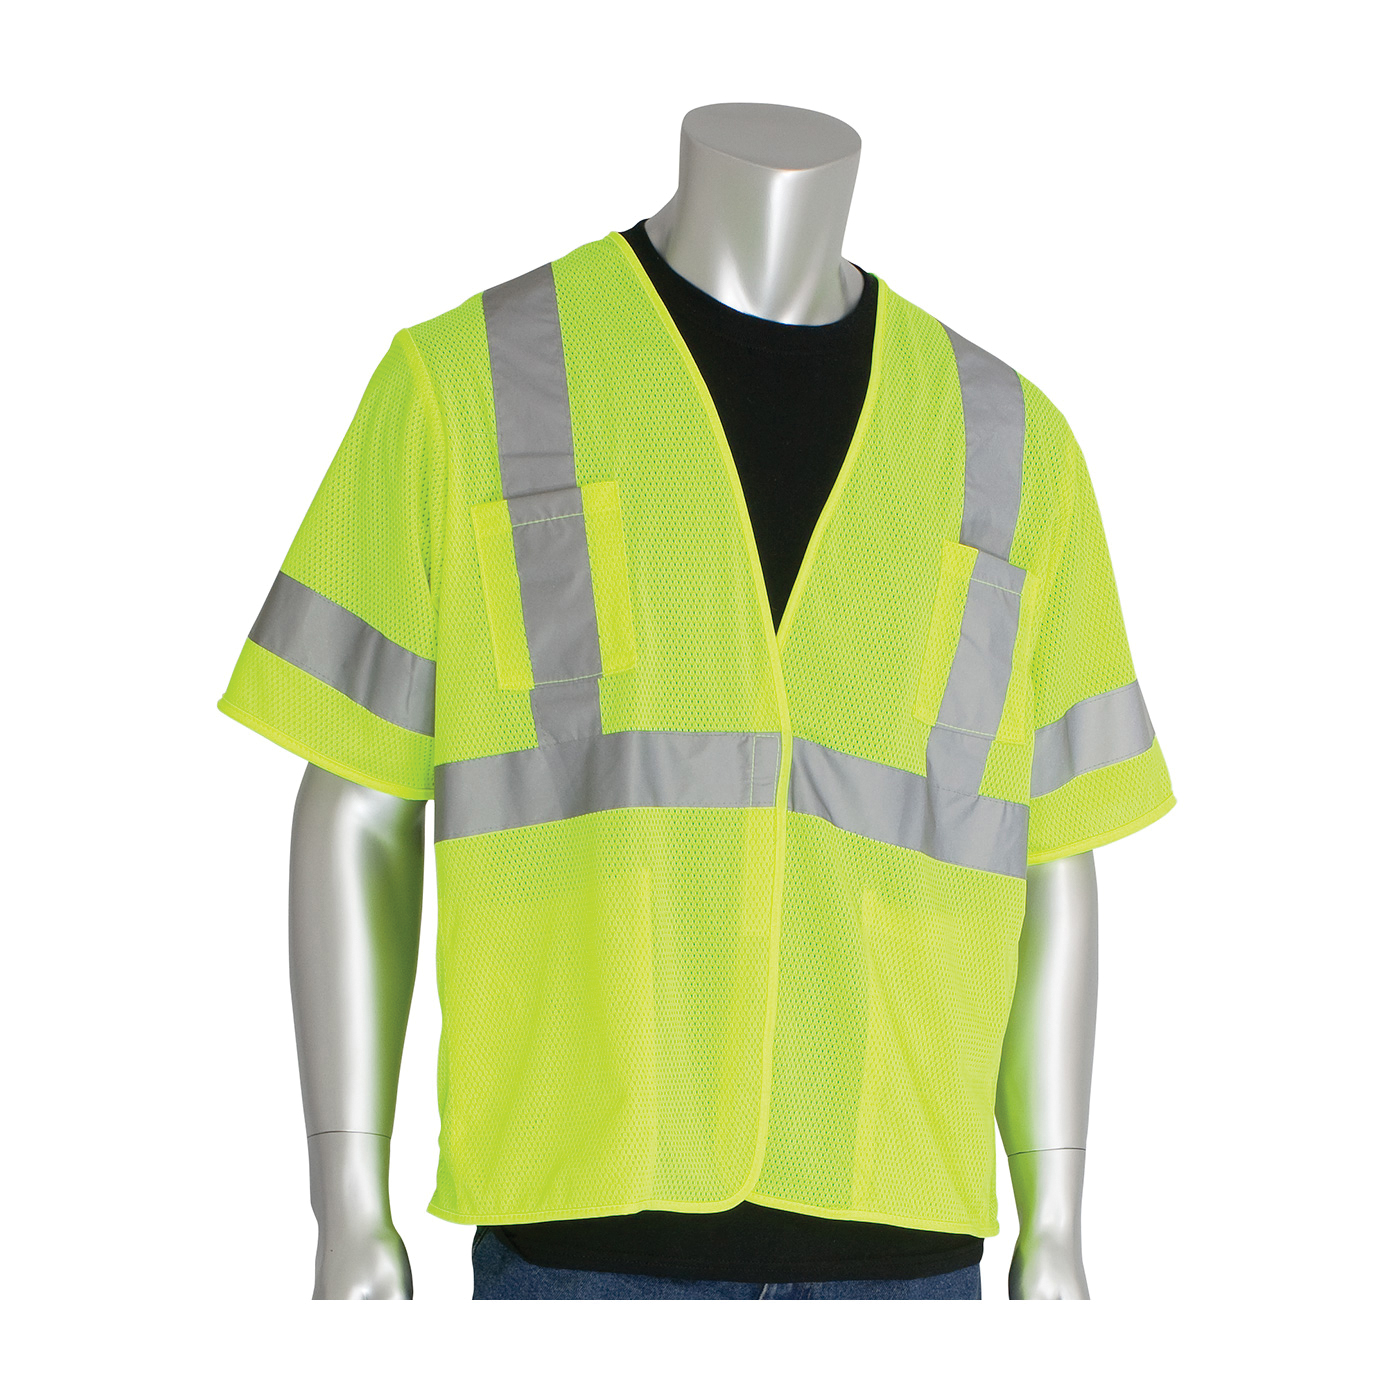 PIP® 303-HSVELY-S Safety Vest, S, Hi-Viz Lime Yellow, Polyester Mesh, Hook and Loop Closure, 4 Pockets, ANSI Class: Class 3, Specifications Met: ANSI 107 Type R